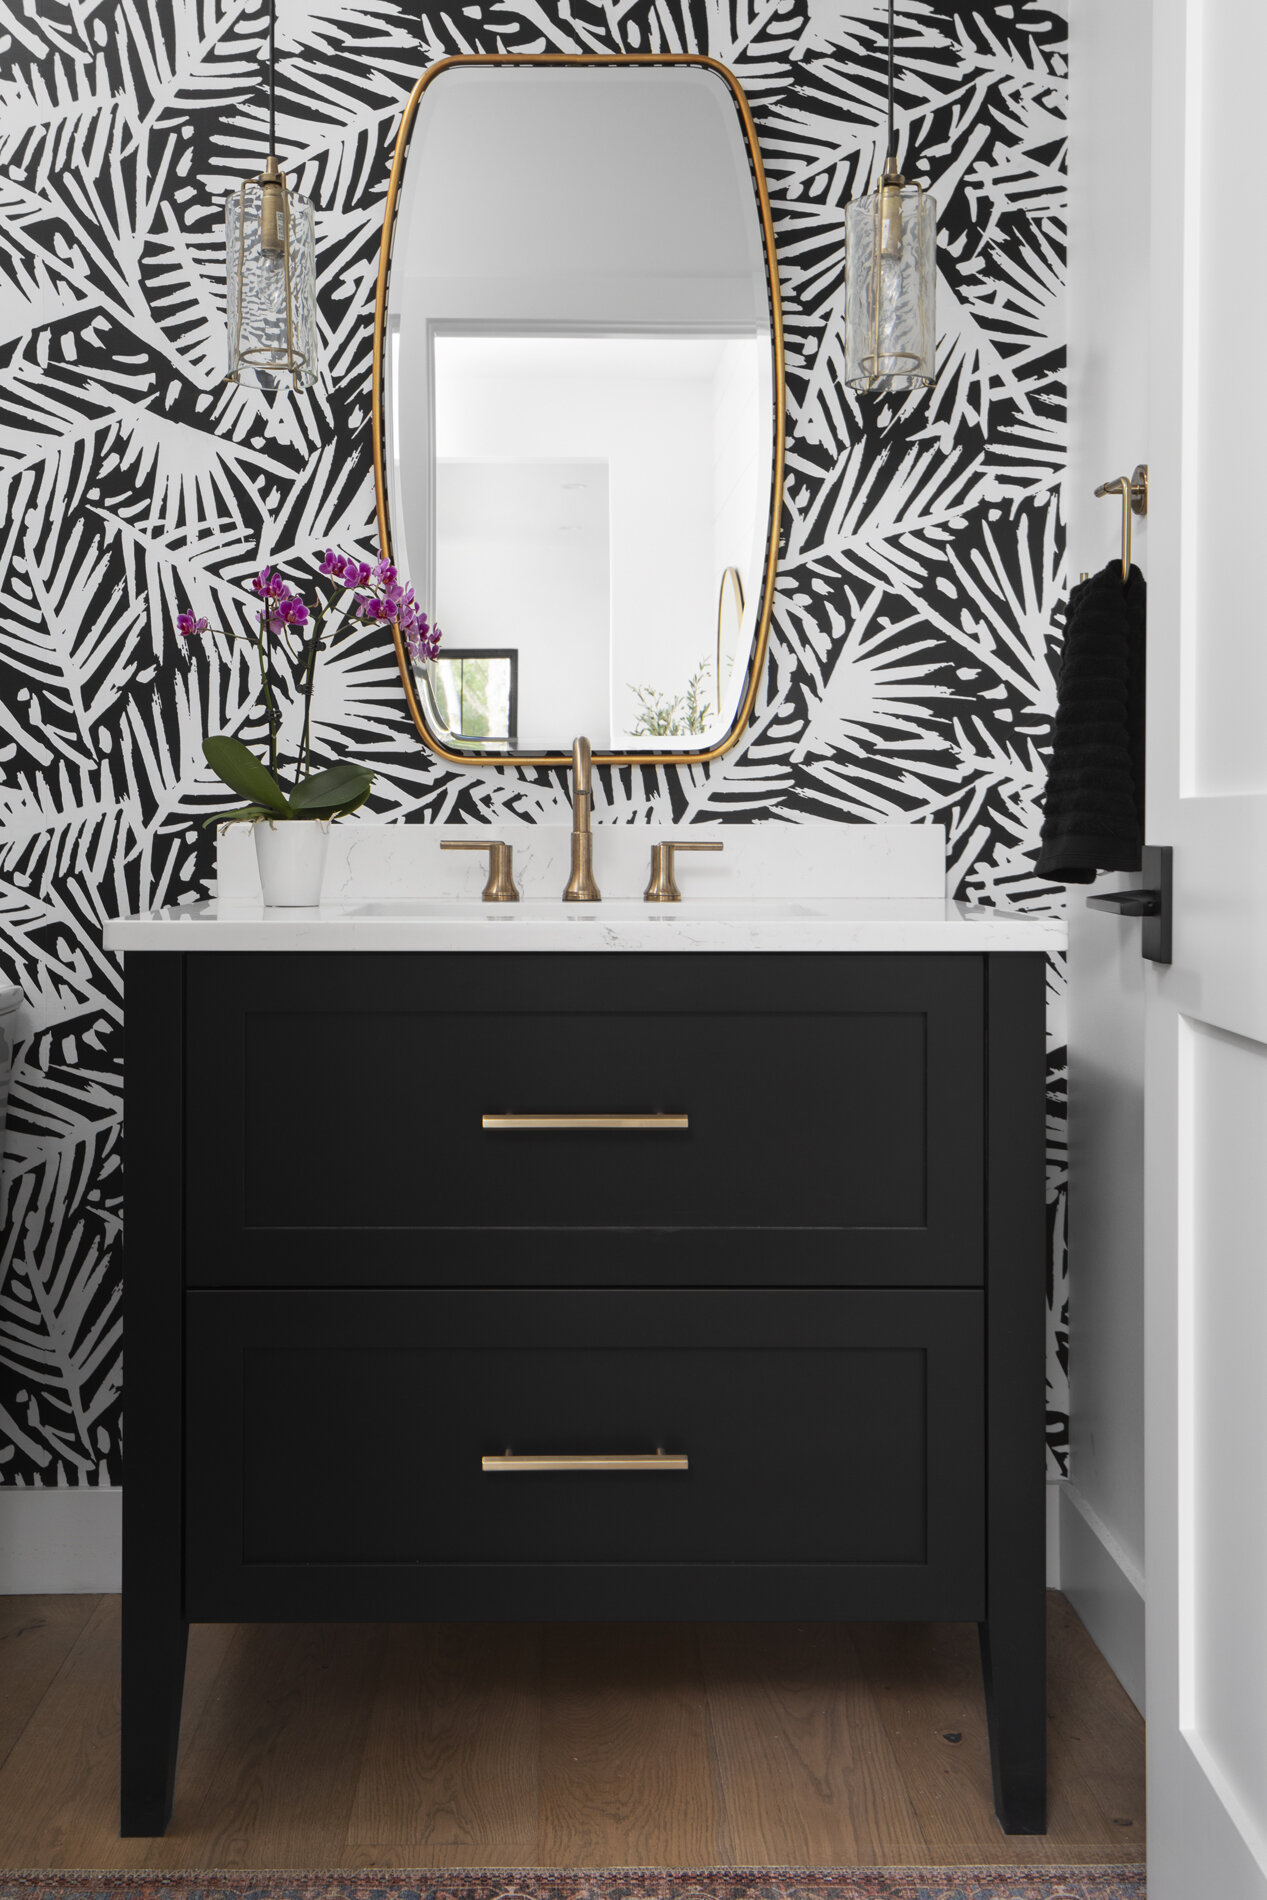 Black and White Bathroom Design for Everyday Beauty